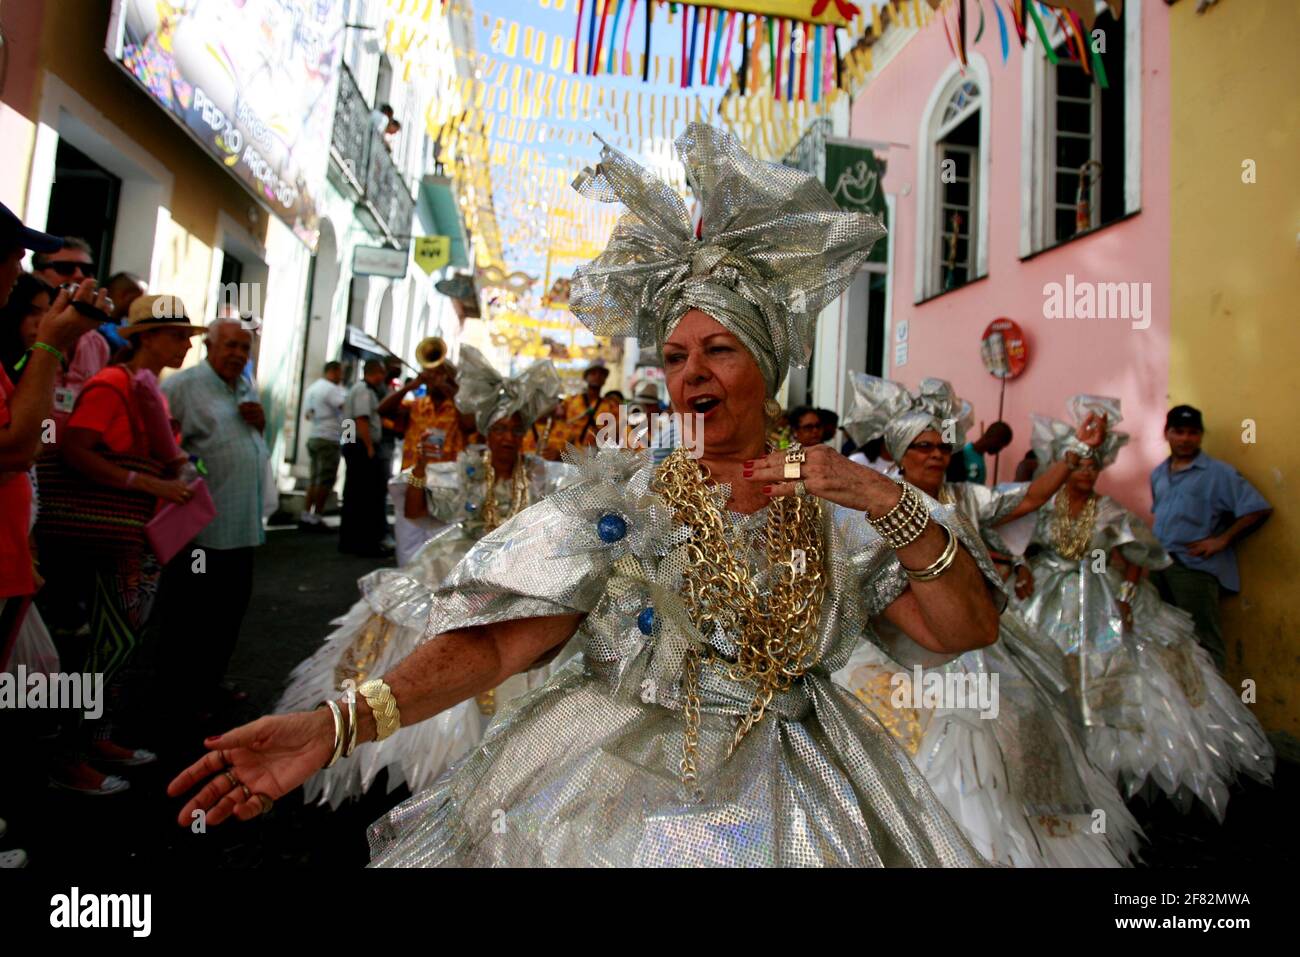 salvador, bahia / brazil - february 11, 2015: Members of the Enchendo and Derramando block are seen in Pelourinho during the carnival celebrations in Stock Photo